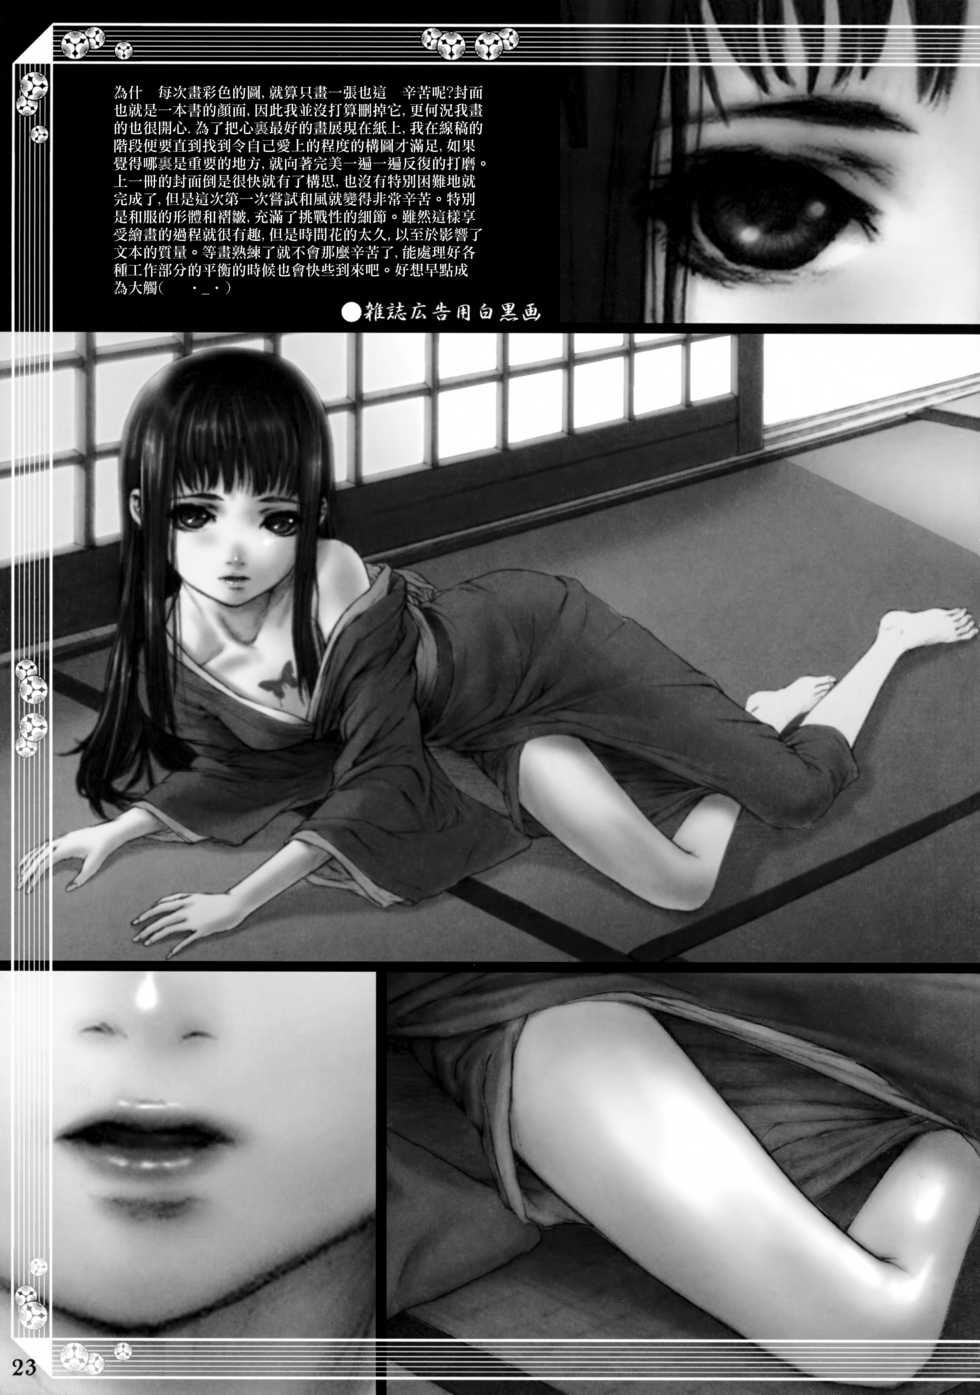 [Studio NEO BLACK (Neo Black)] Ageha Sono Yon - Silent Butterfly 4th [Chinese] [角落漢化] - Page 23